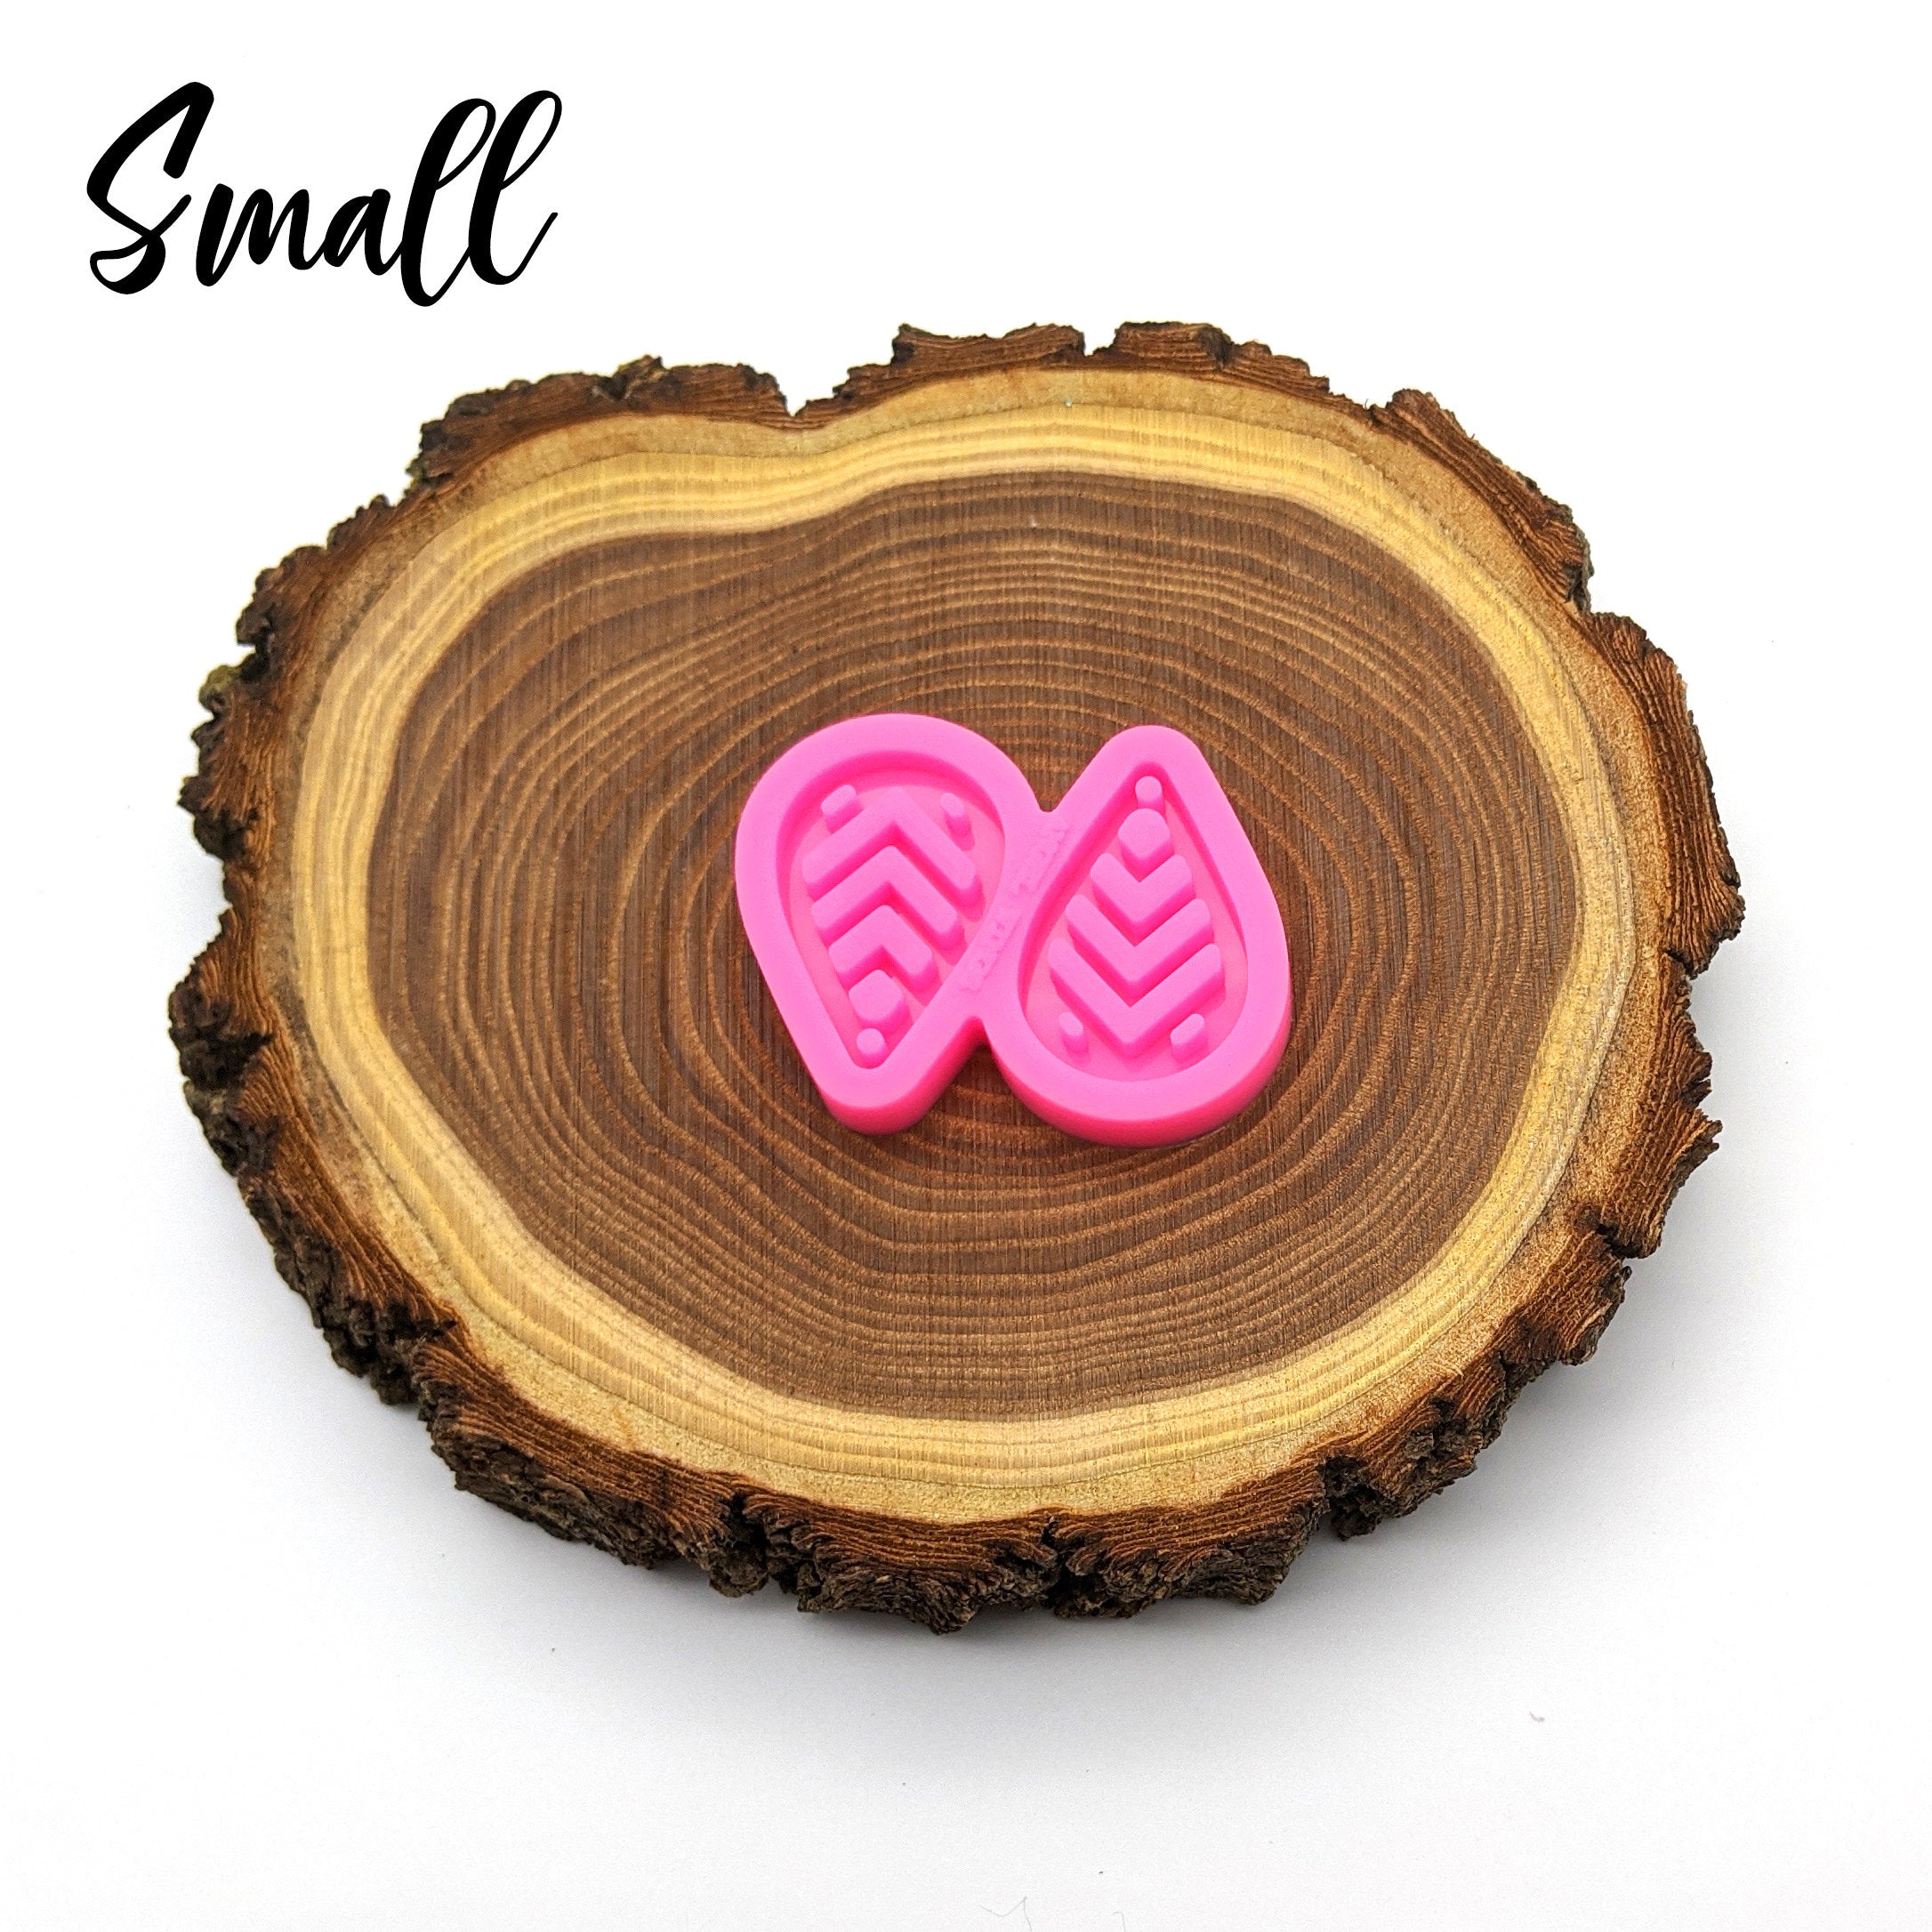 Zig-Zag Earring Shiny Silicone Mold for Epoxy Resin Keychain - Jewelry Making - Ornament Silicone Mold